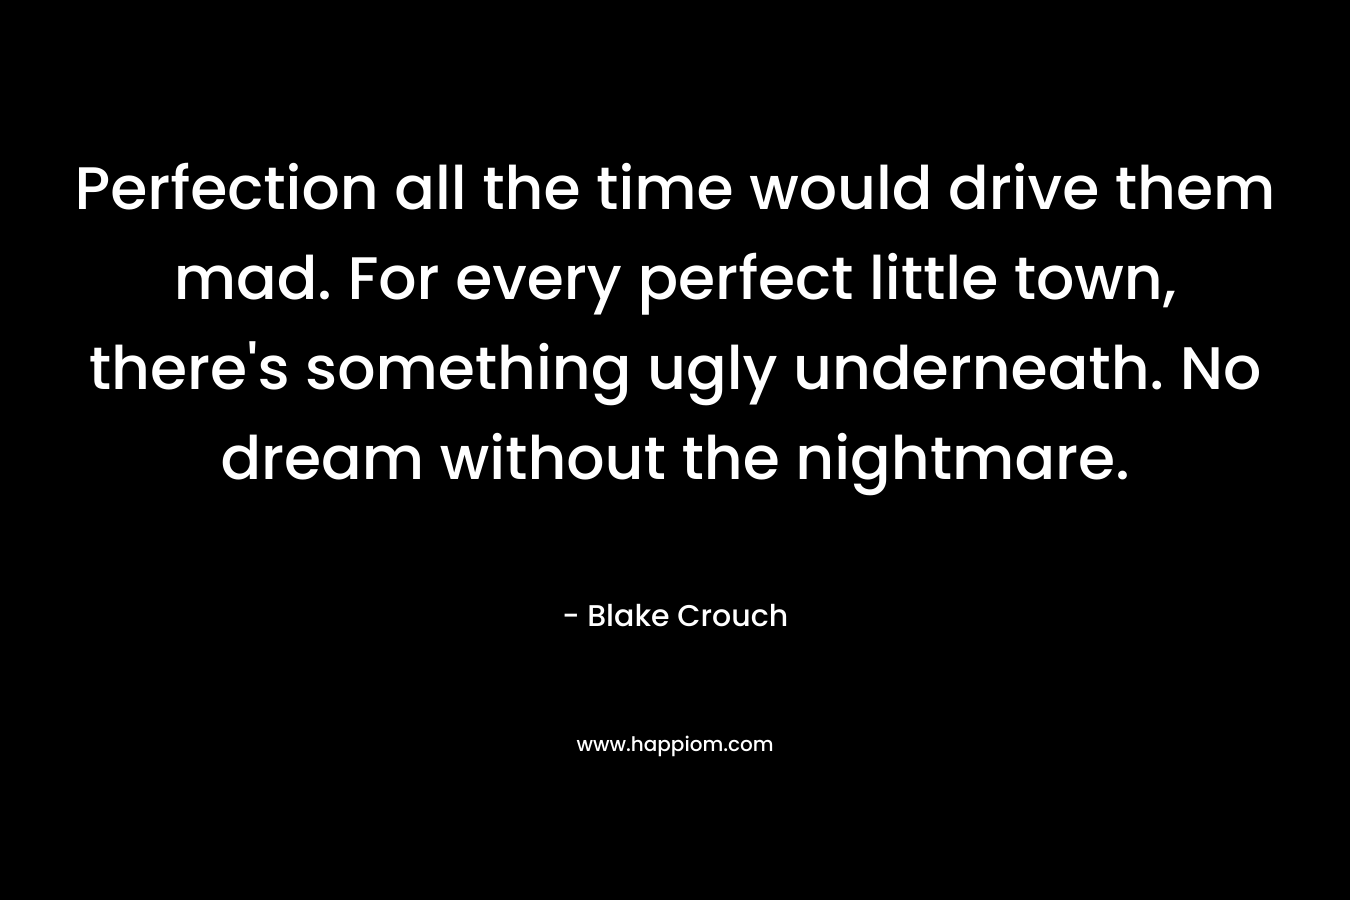 Perfection all the time would drive them mad. For every perfect little town, there’s something ugly underneath. No dream without the nightmare. – Blake Crouch